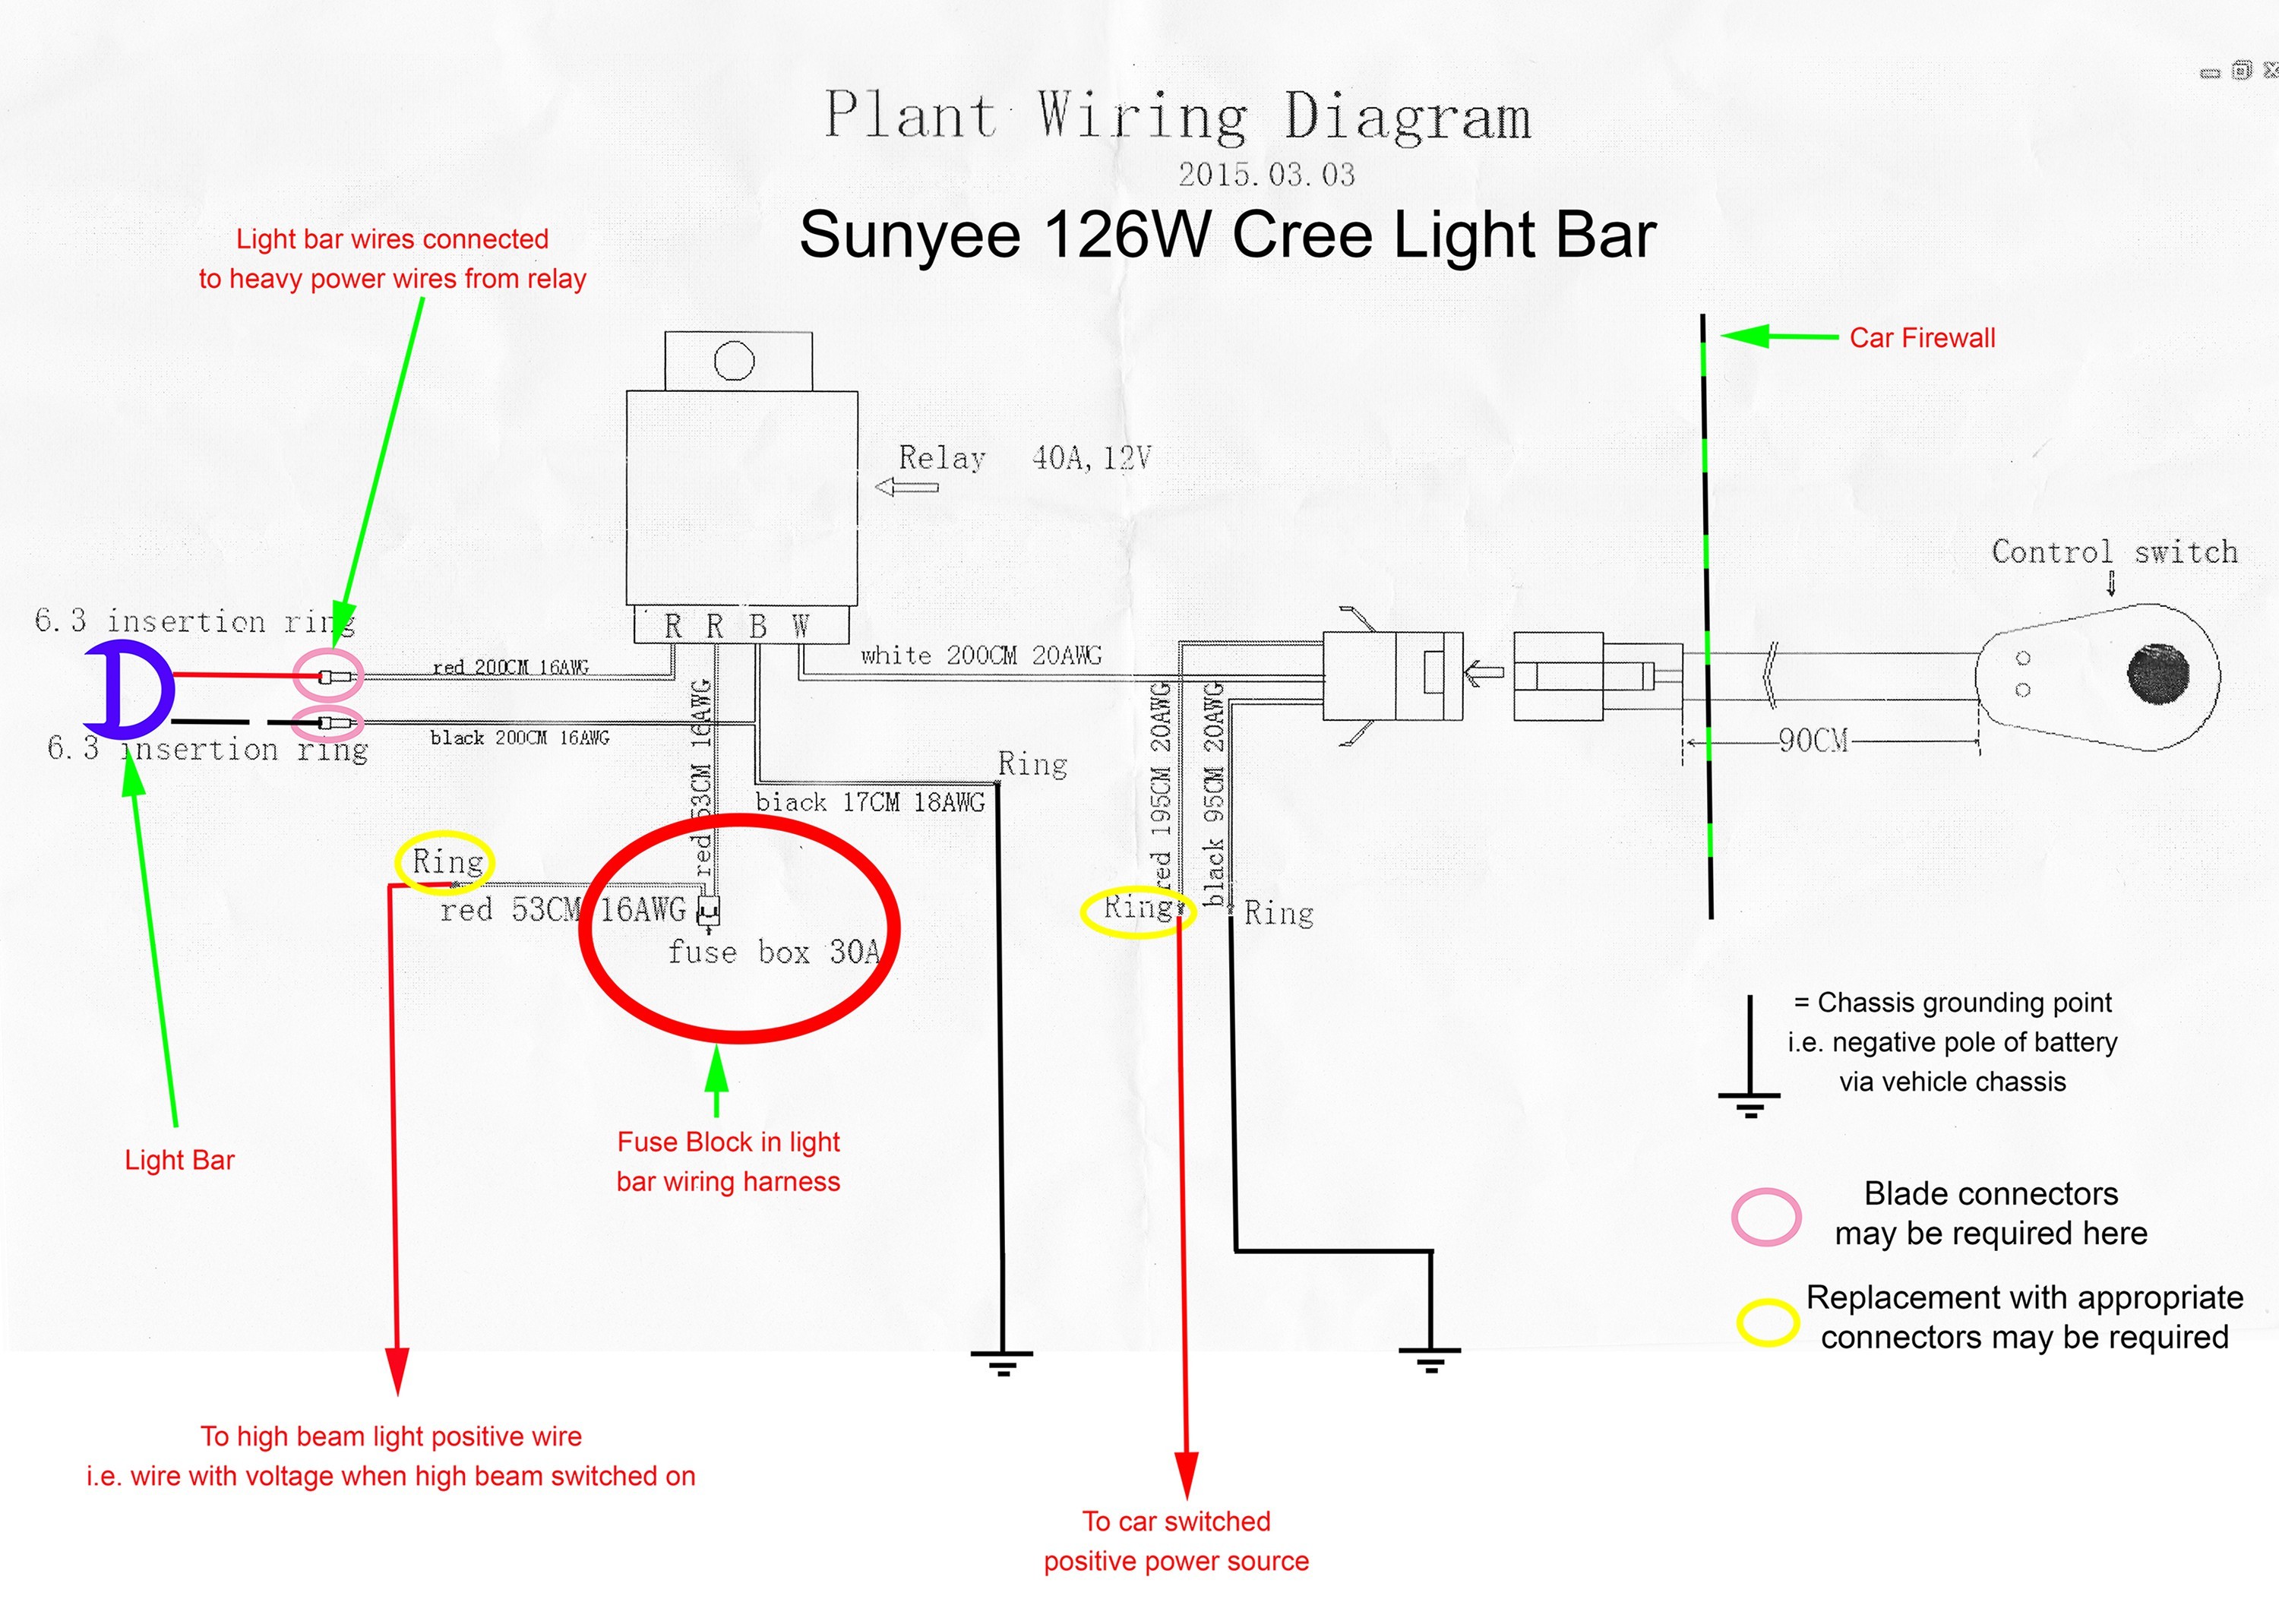 Install Sunyee Cree 126W Light Bar SG II Forester Page 3 Within Wiring Diagram